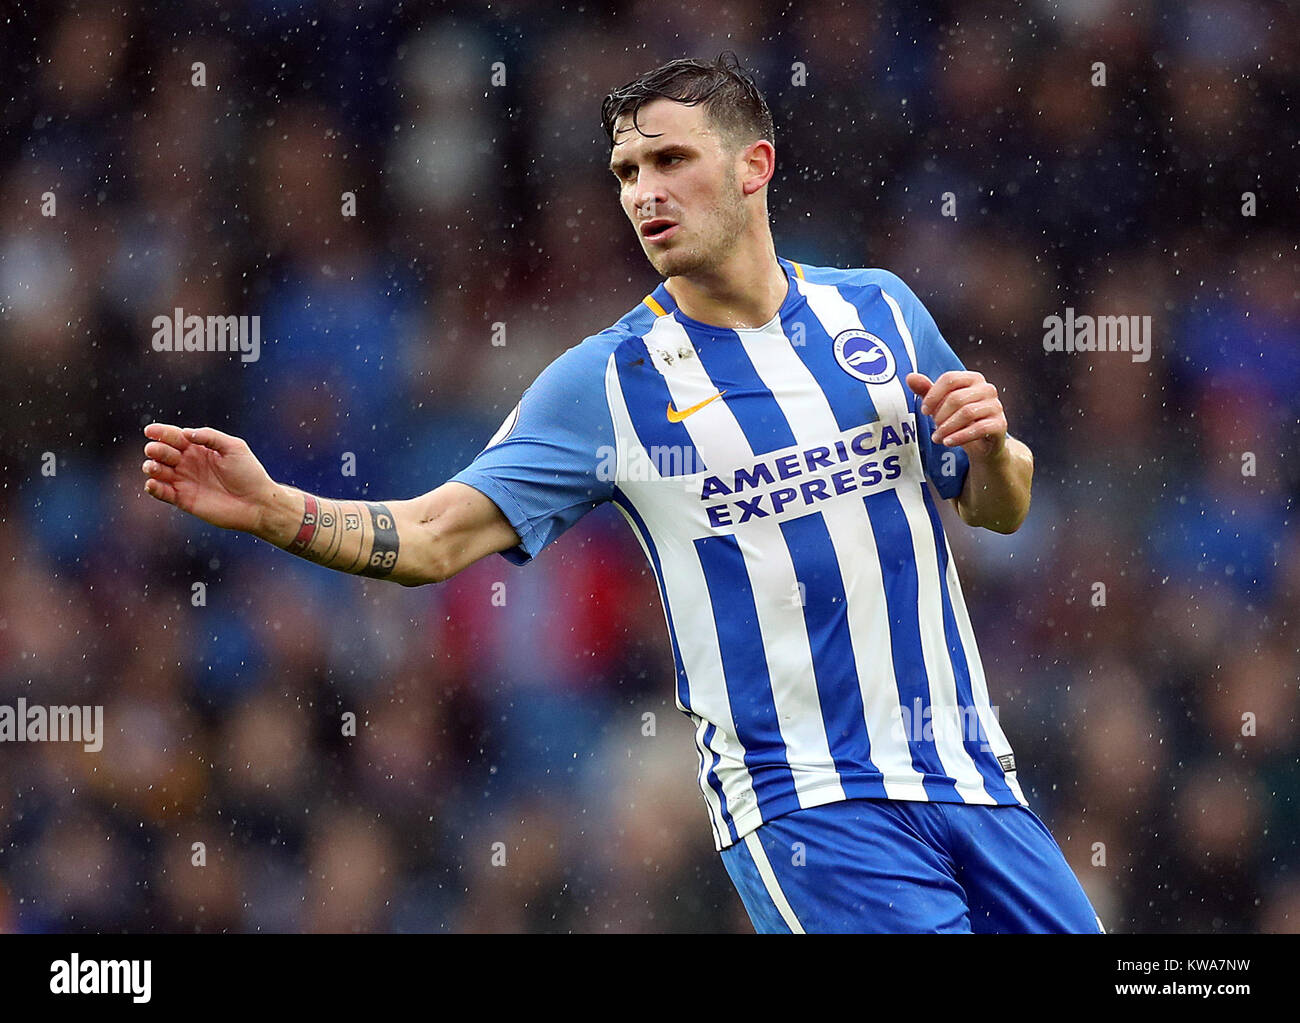 Brighton & Hove Albion's Pascal Gross during the Premier League match at the AMEX Stadium, Brighton. PRESS ASSOCIATION Photo. Picture date: Monday January 1, 2018. See PA story SOCCER Brighton. Photo credit should read: Adam Davy/PA Wire. RESTRICTIONS: No use with unauthorised audio, video, data, fixture lists, club/league logos or 'live' services. Online in-match use limited to 75 images, no video emulation. No use in betting, games or single club/league/player publications. Stock Photo